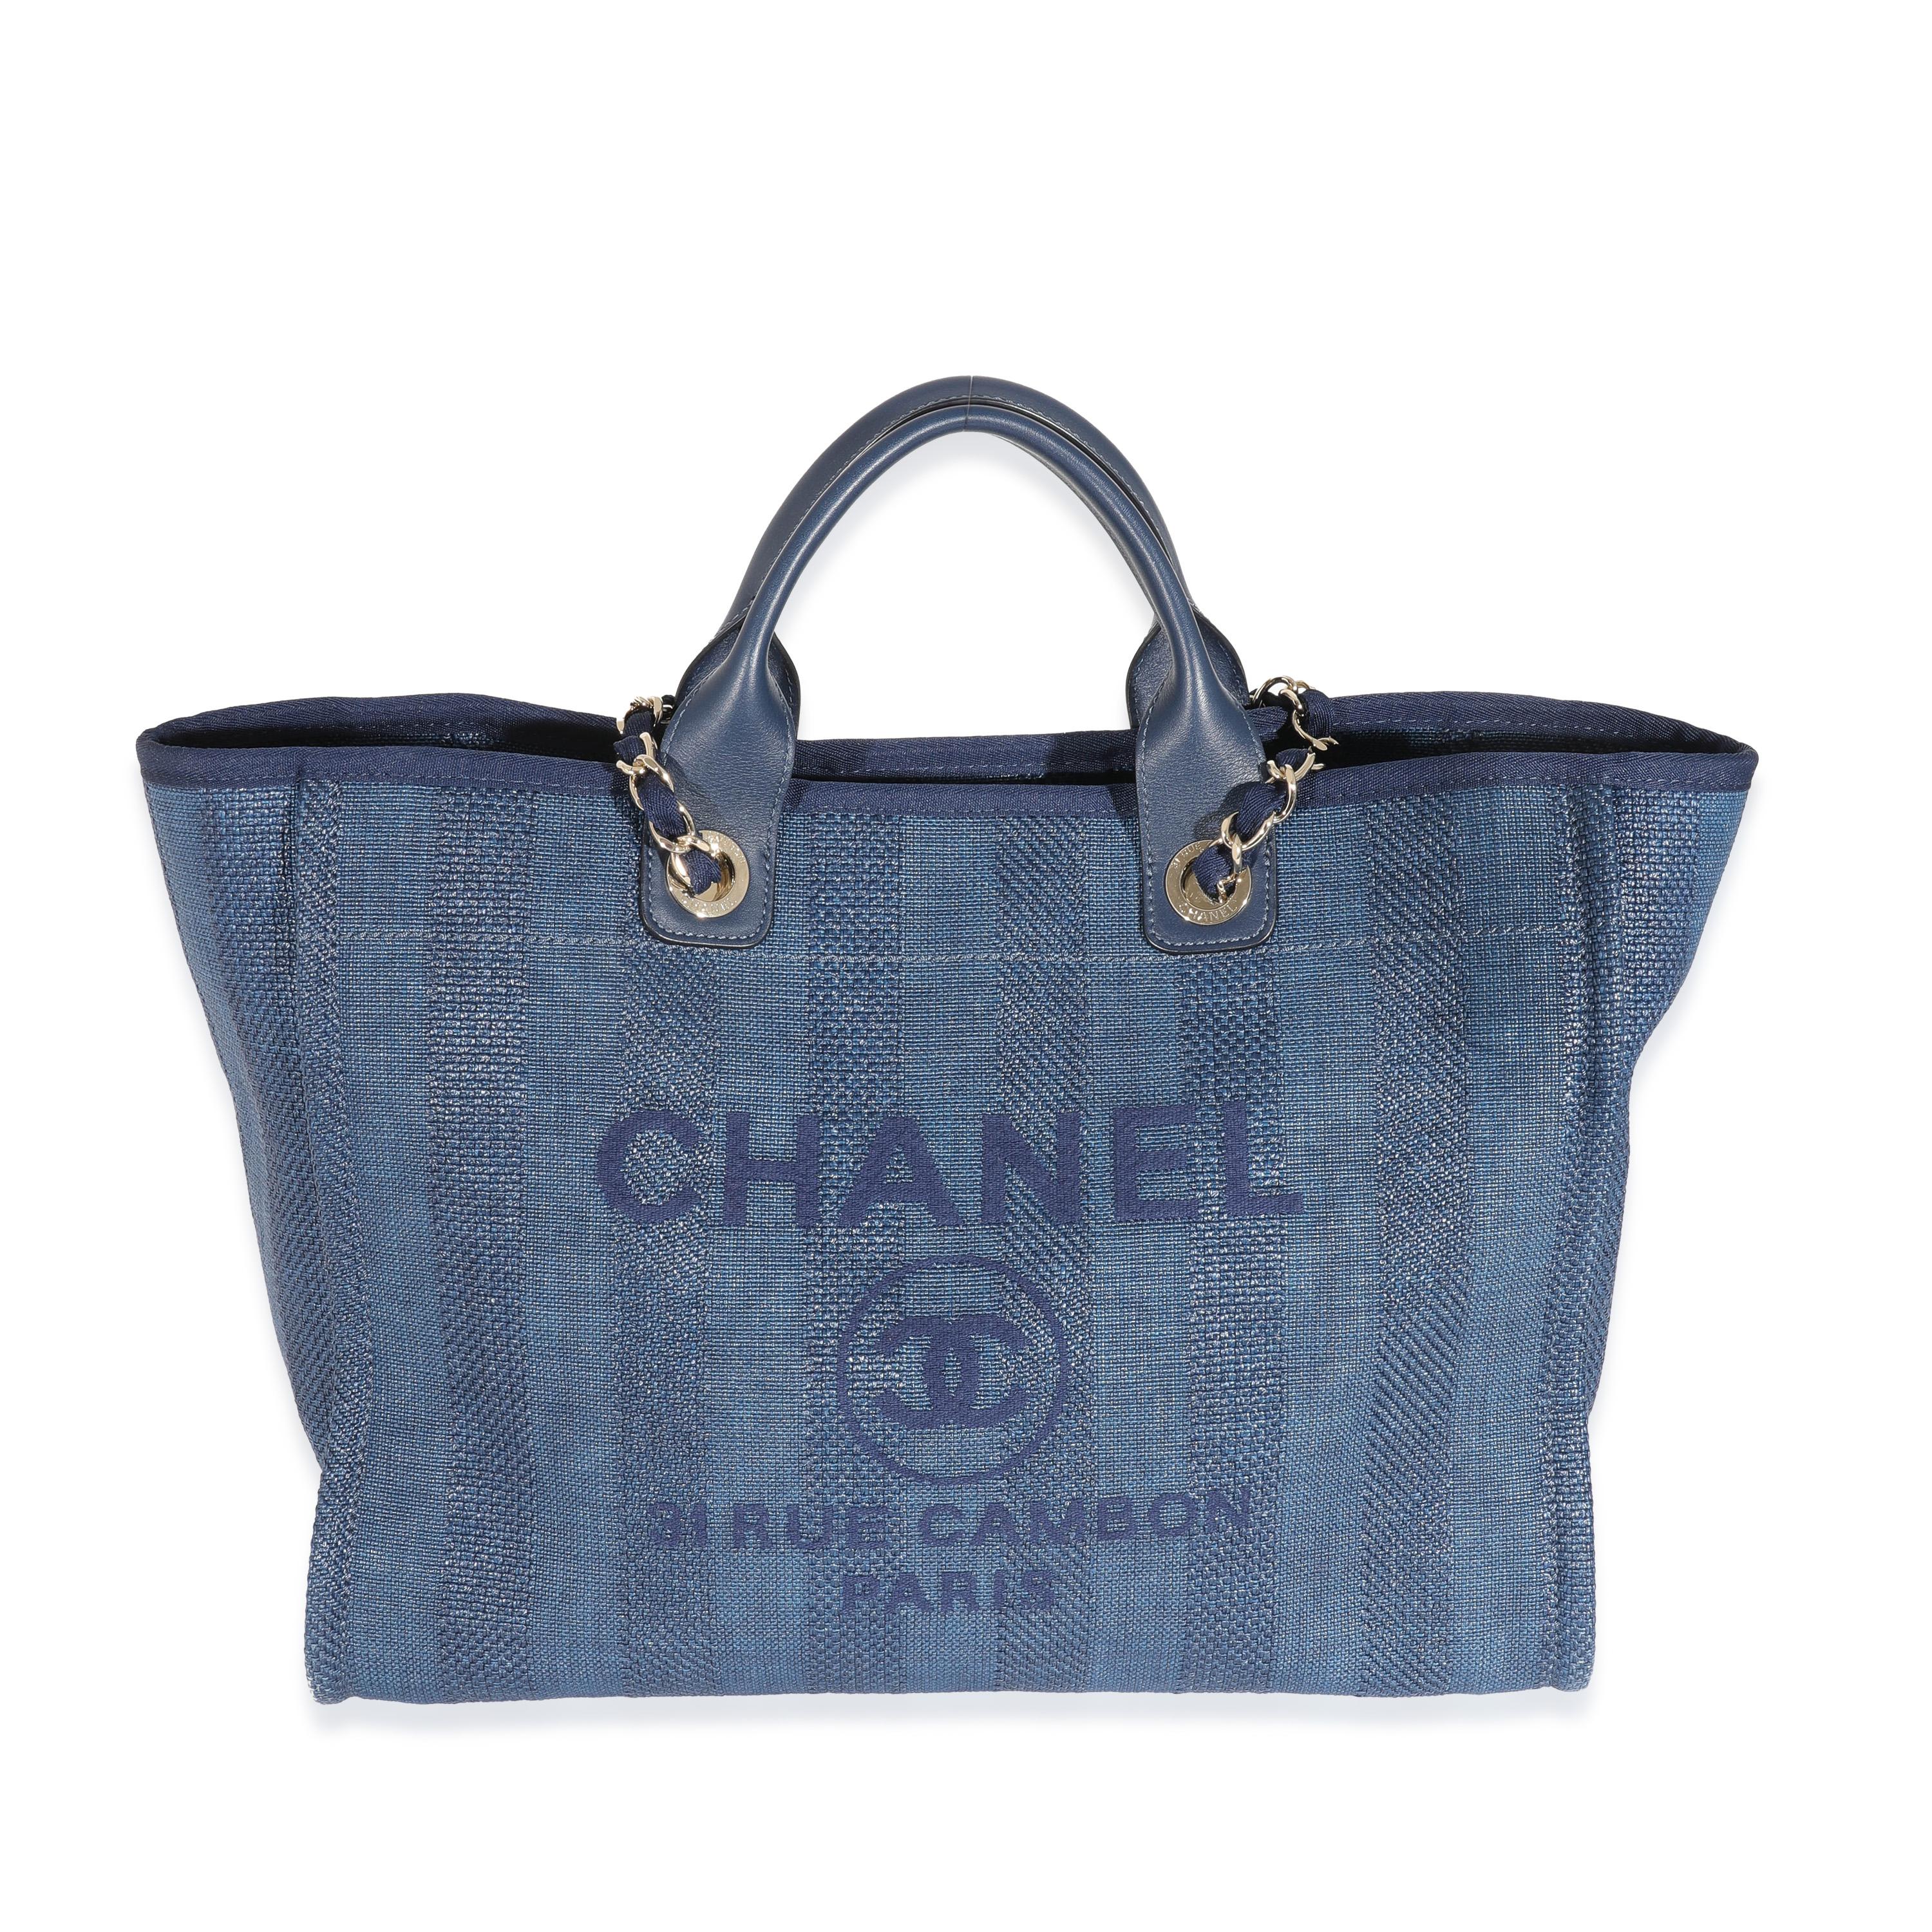 Chanel Striped Navy Mixed Fibres Large Deauville Tote In Excellent Condition For Sale In New York, NY